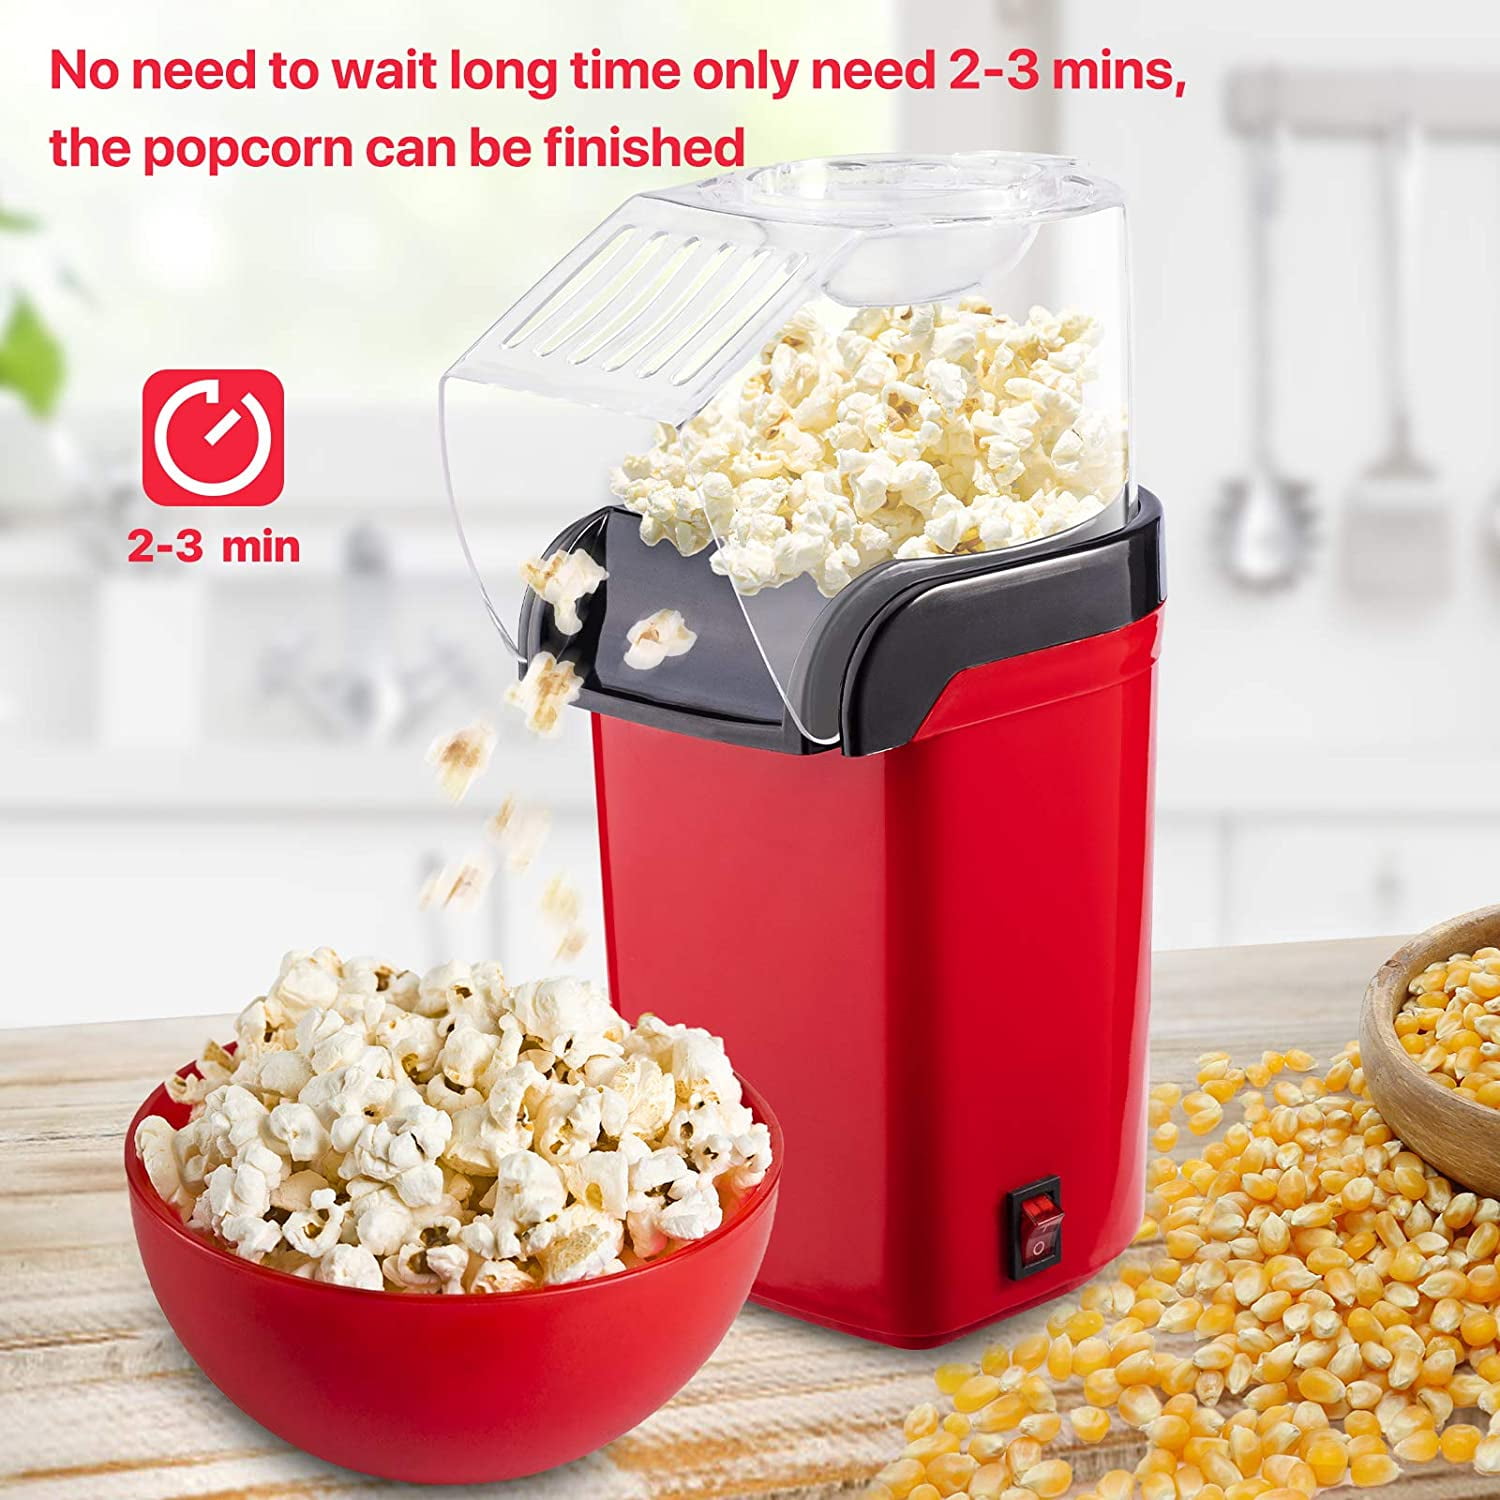 No Oil Required! 4YourHome 1200W Red & White 1950s Retro Style Hot Air Popcorn Maker for Fresh Healthier & Fat-Free Popcorn 